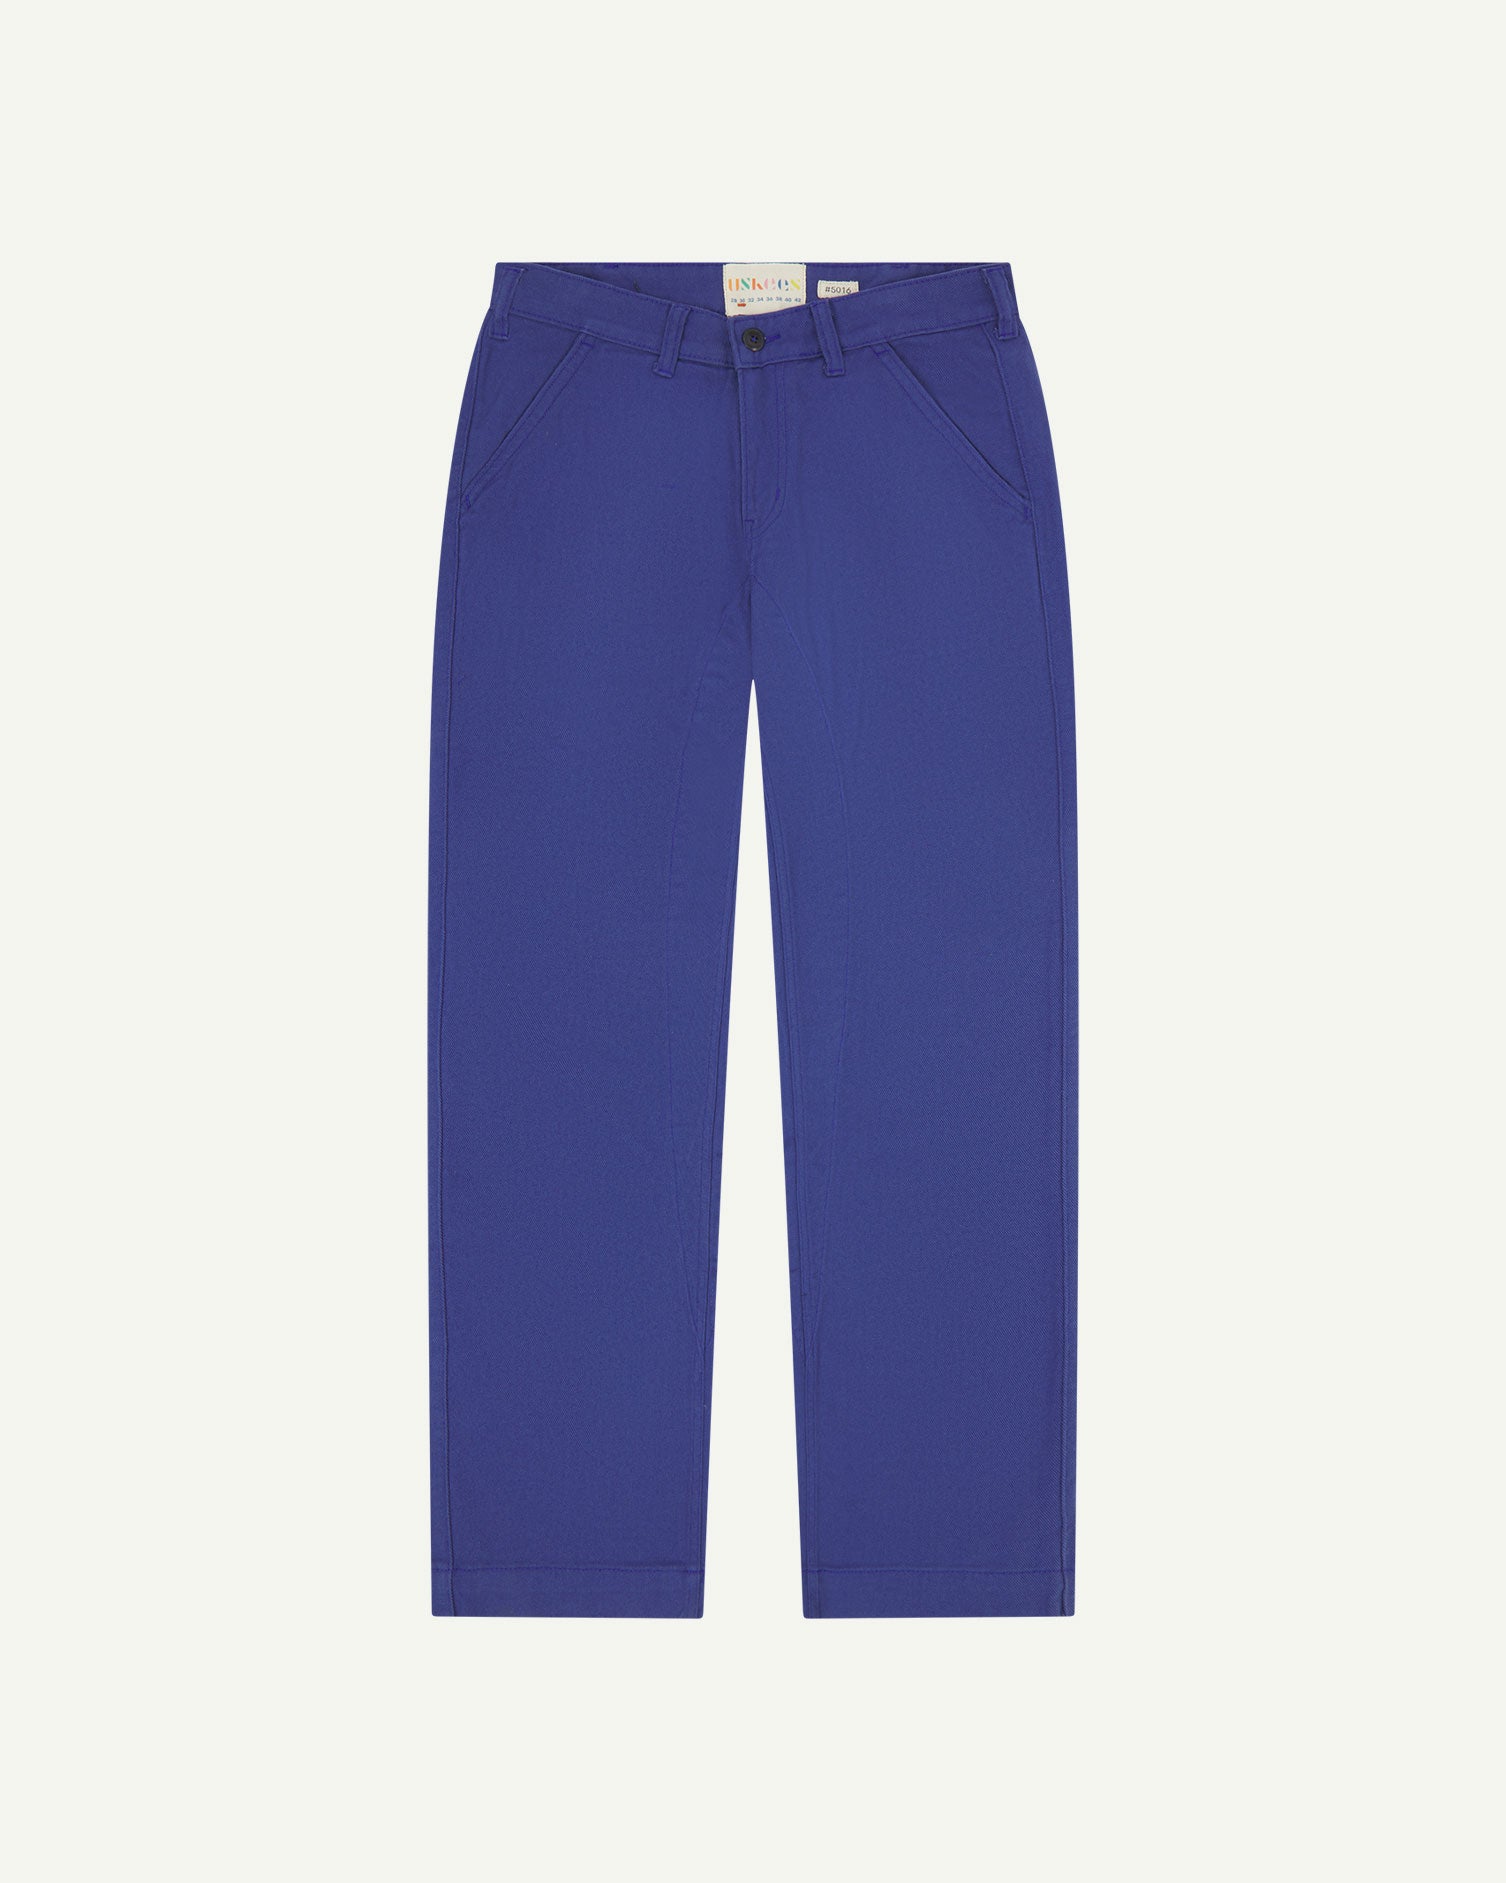 Front flat view of 5016 Uskees men's organic heavyweight drill ultra-blue 'commuter' trousers showing straight leg fit.